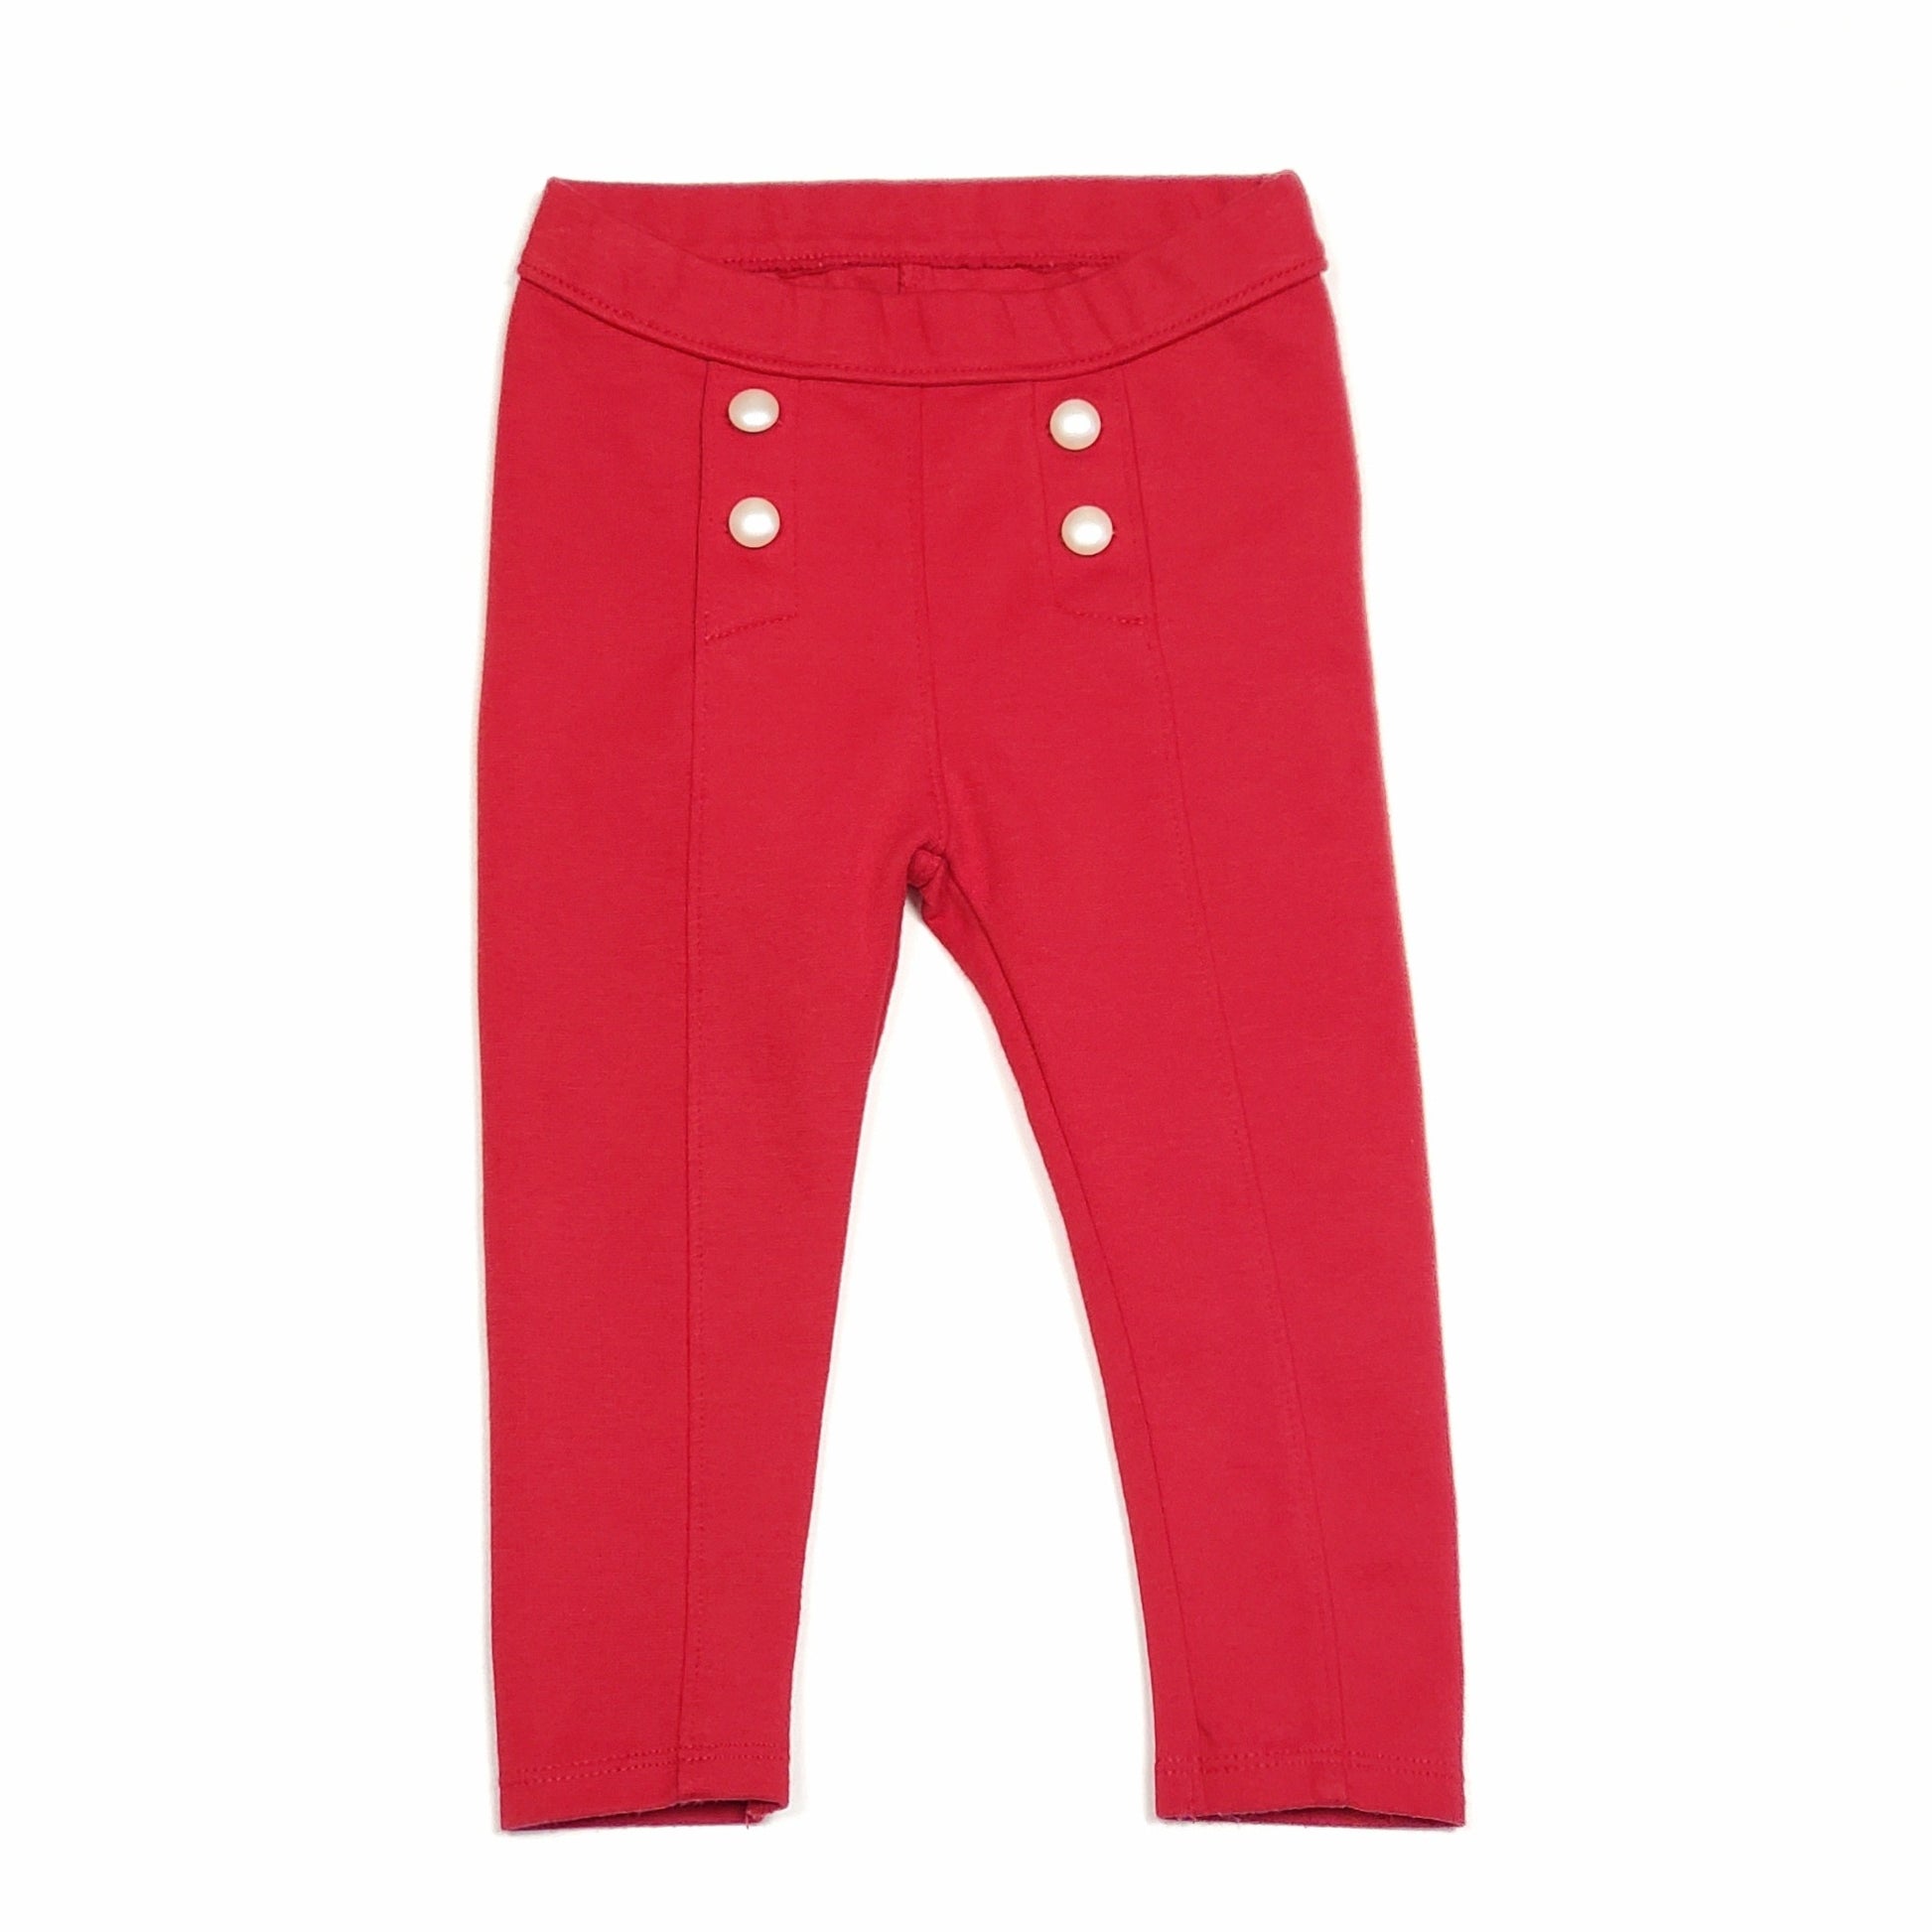 Janie and Jack Red Girls Ponte Pants 12-18M